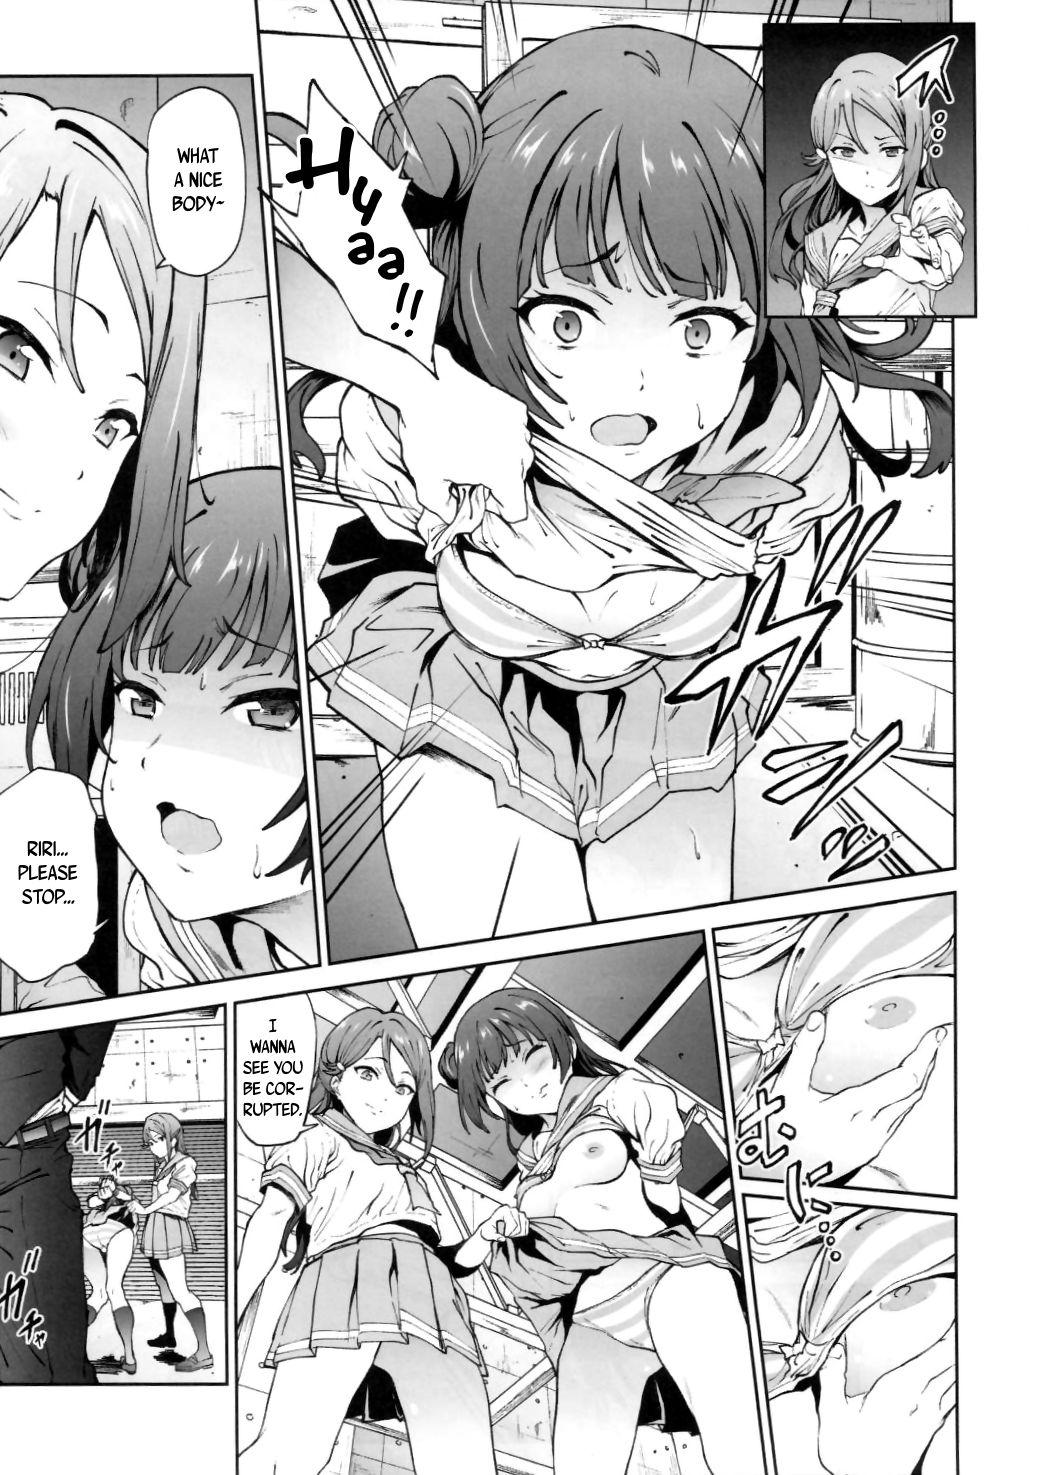 Outside Yohane to Analx! - Love live sunshine Old Young - Page 8